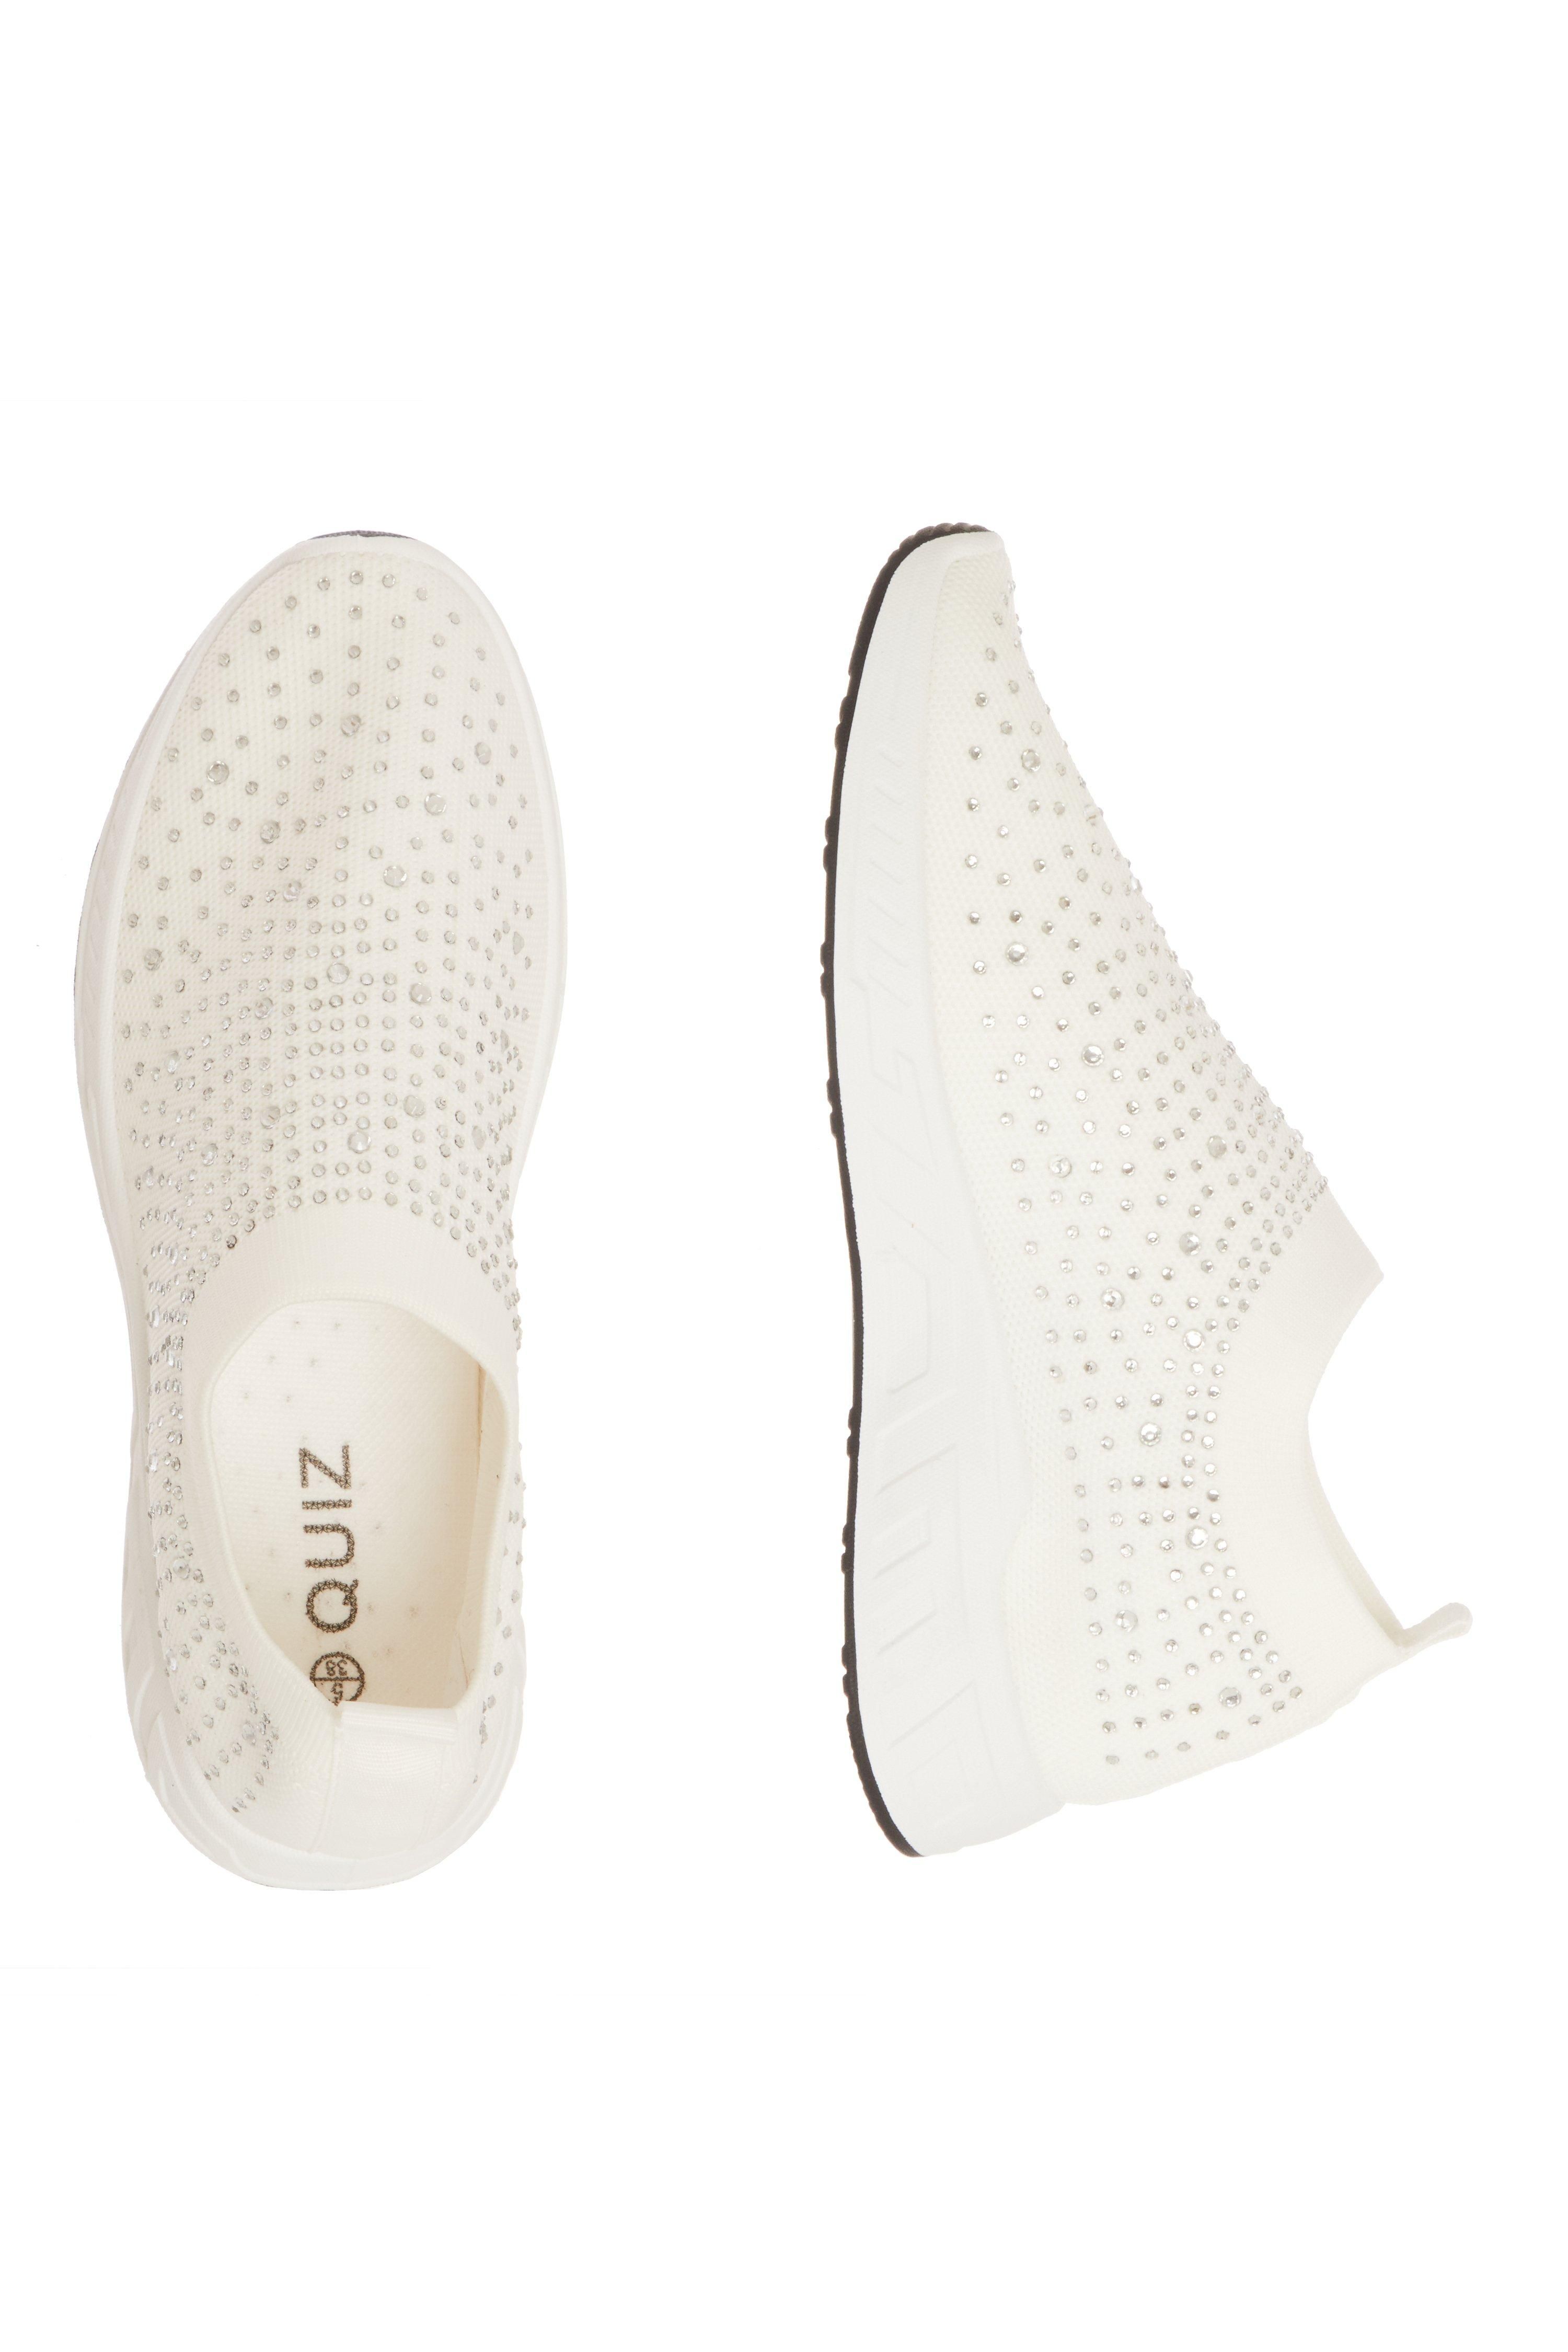 - Casual trainers  - Slip on style  - Knit finish  - Diamante embellished